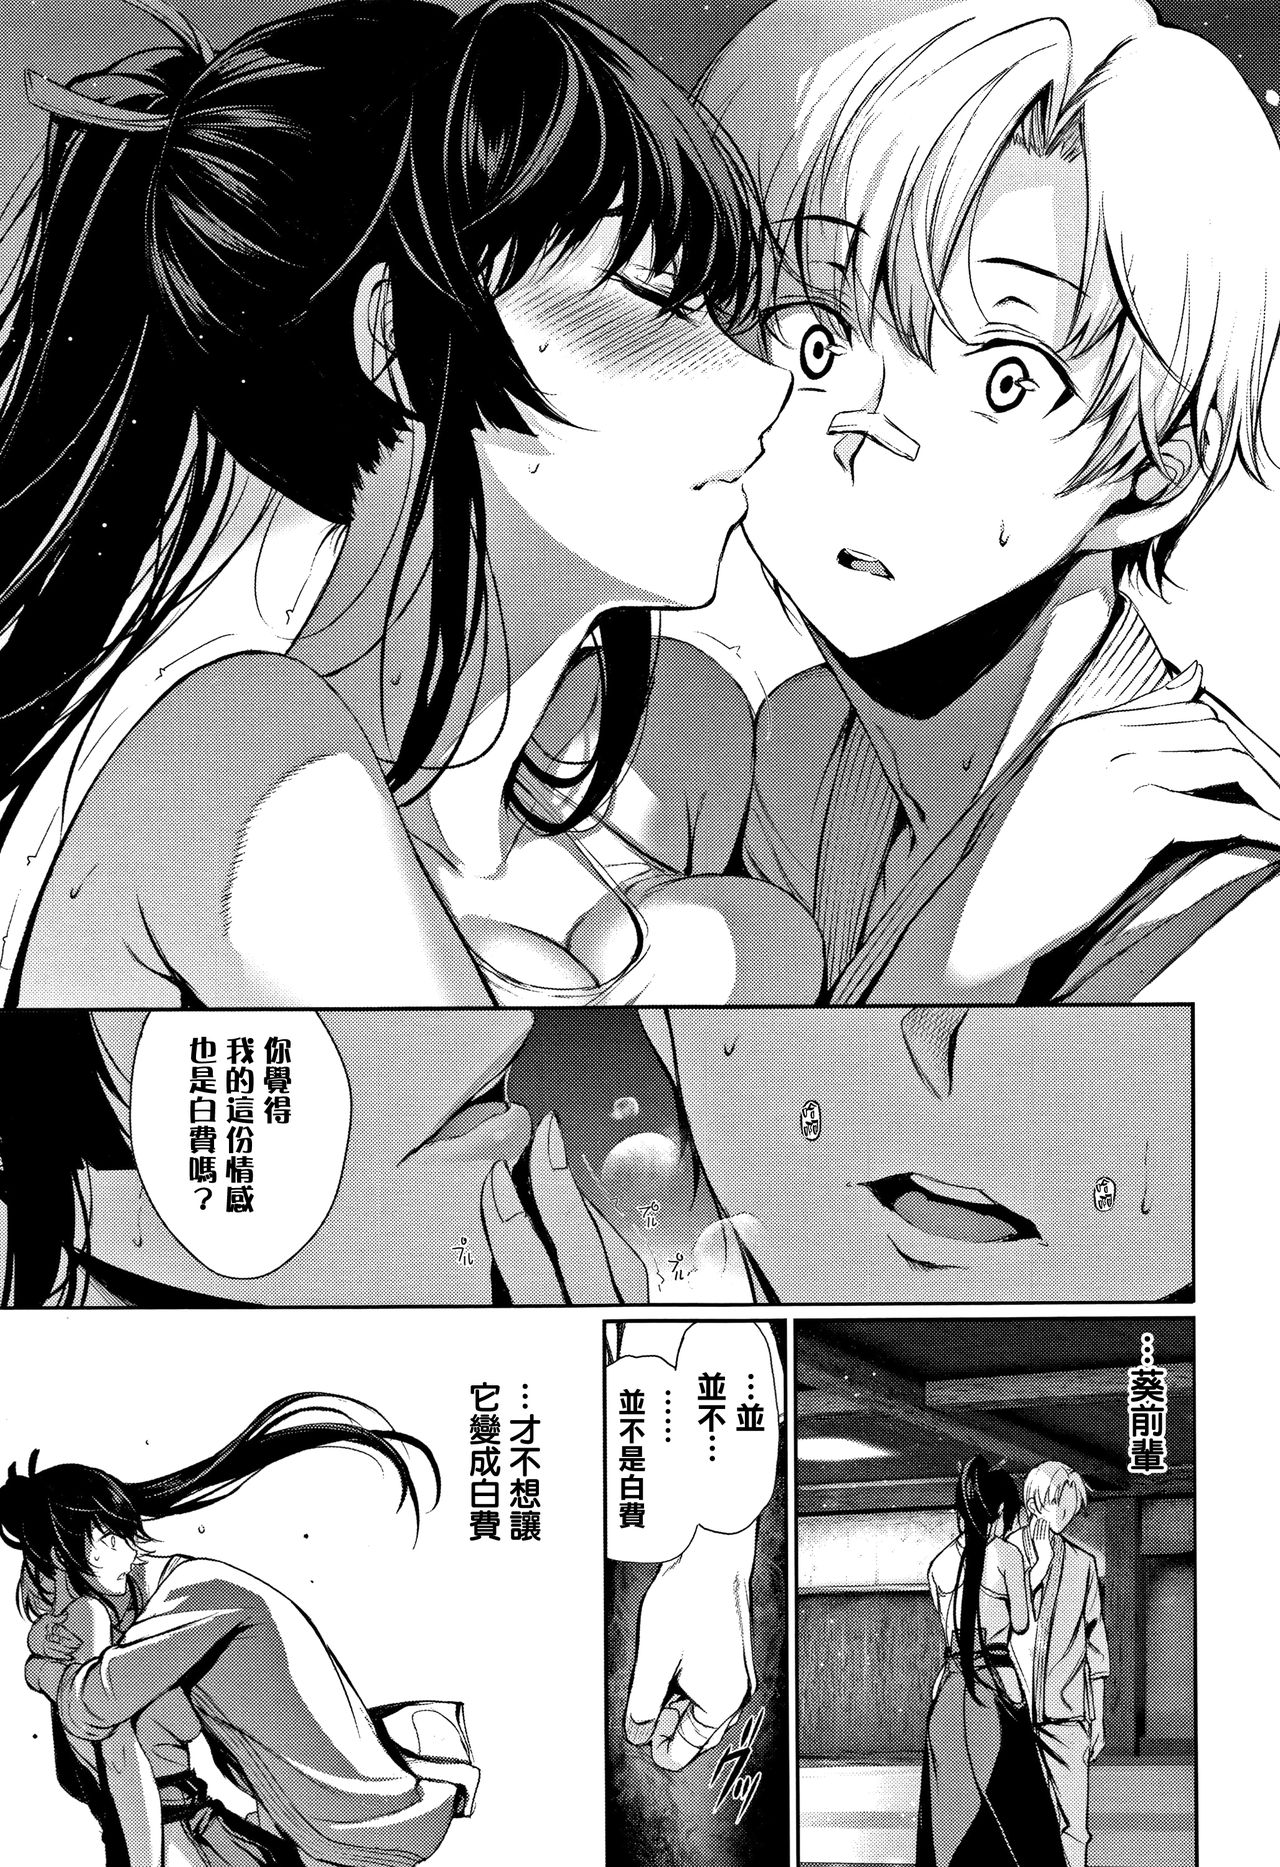 [Gentsuki] Kimi Omou Koi - I think of you. Ch. 1-2 [Chinese] [无毒汉化组] page 18 full